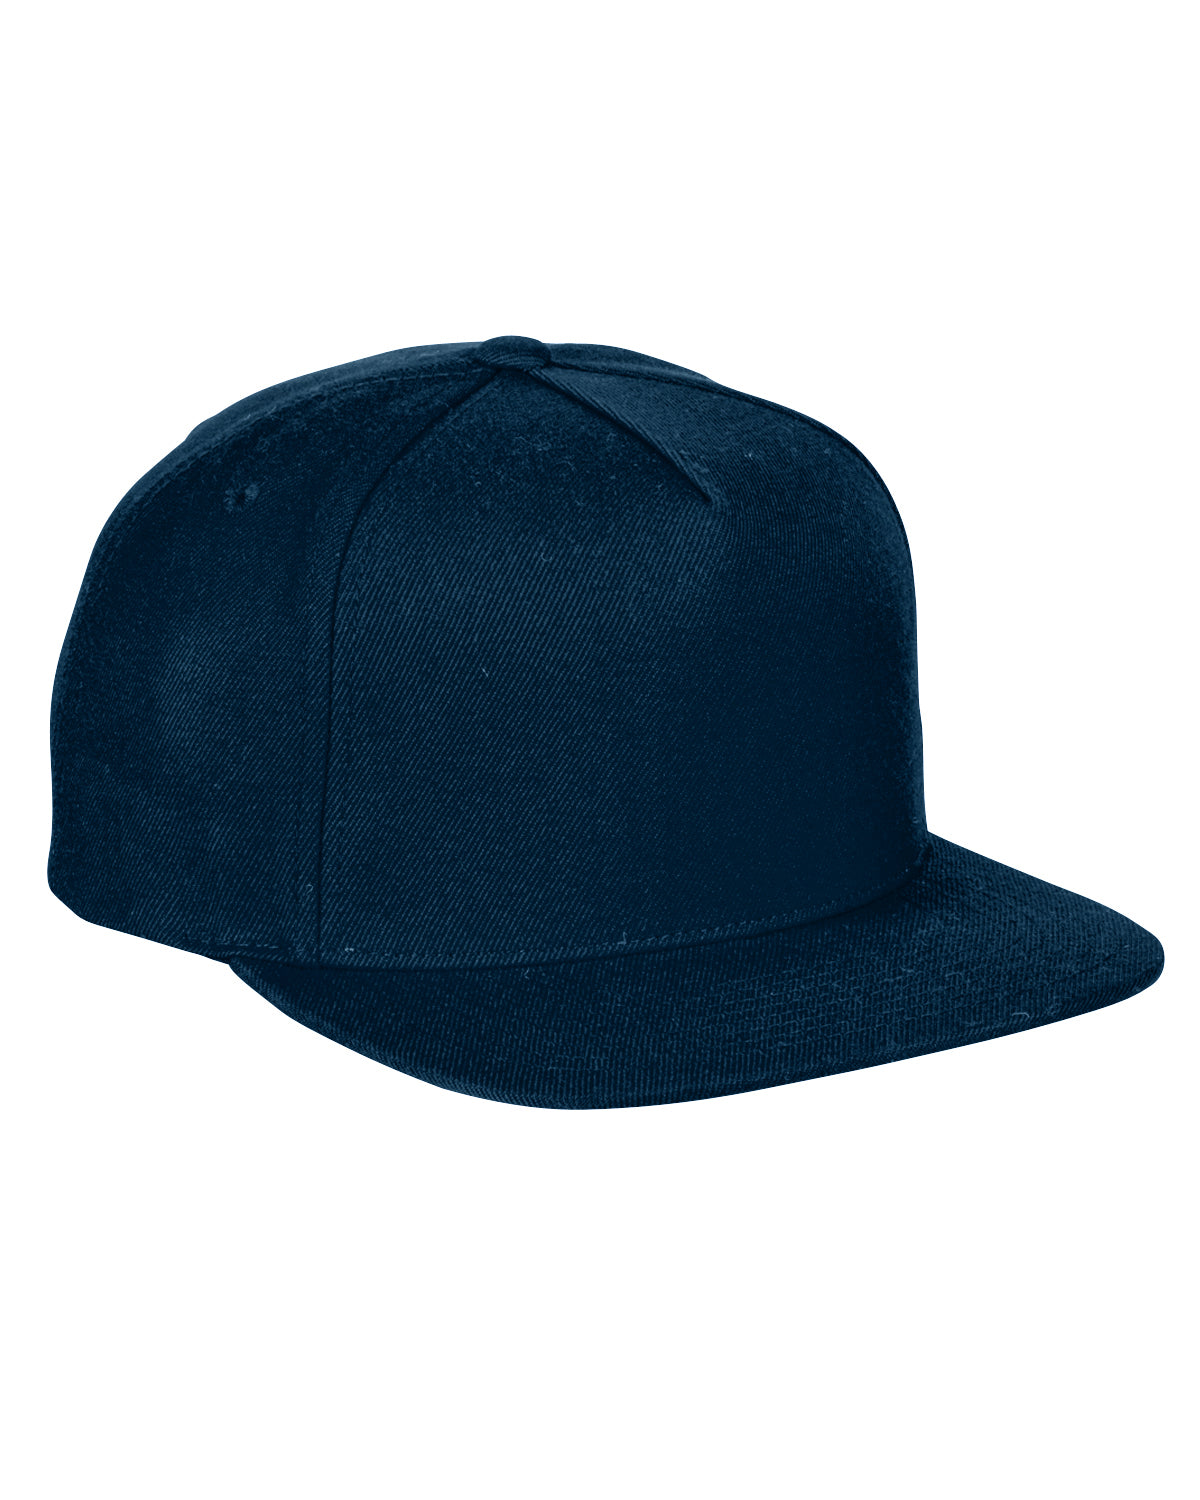 Cheap Affordable Custom Hats Caps Custom Leather and Wood Patches Engraved With Your Logo Hats Black Yupoong Navy